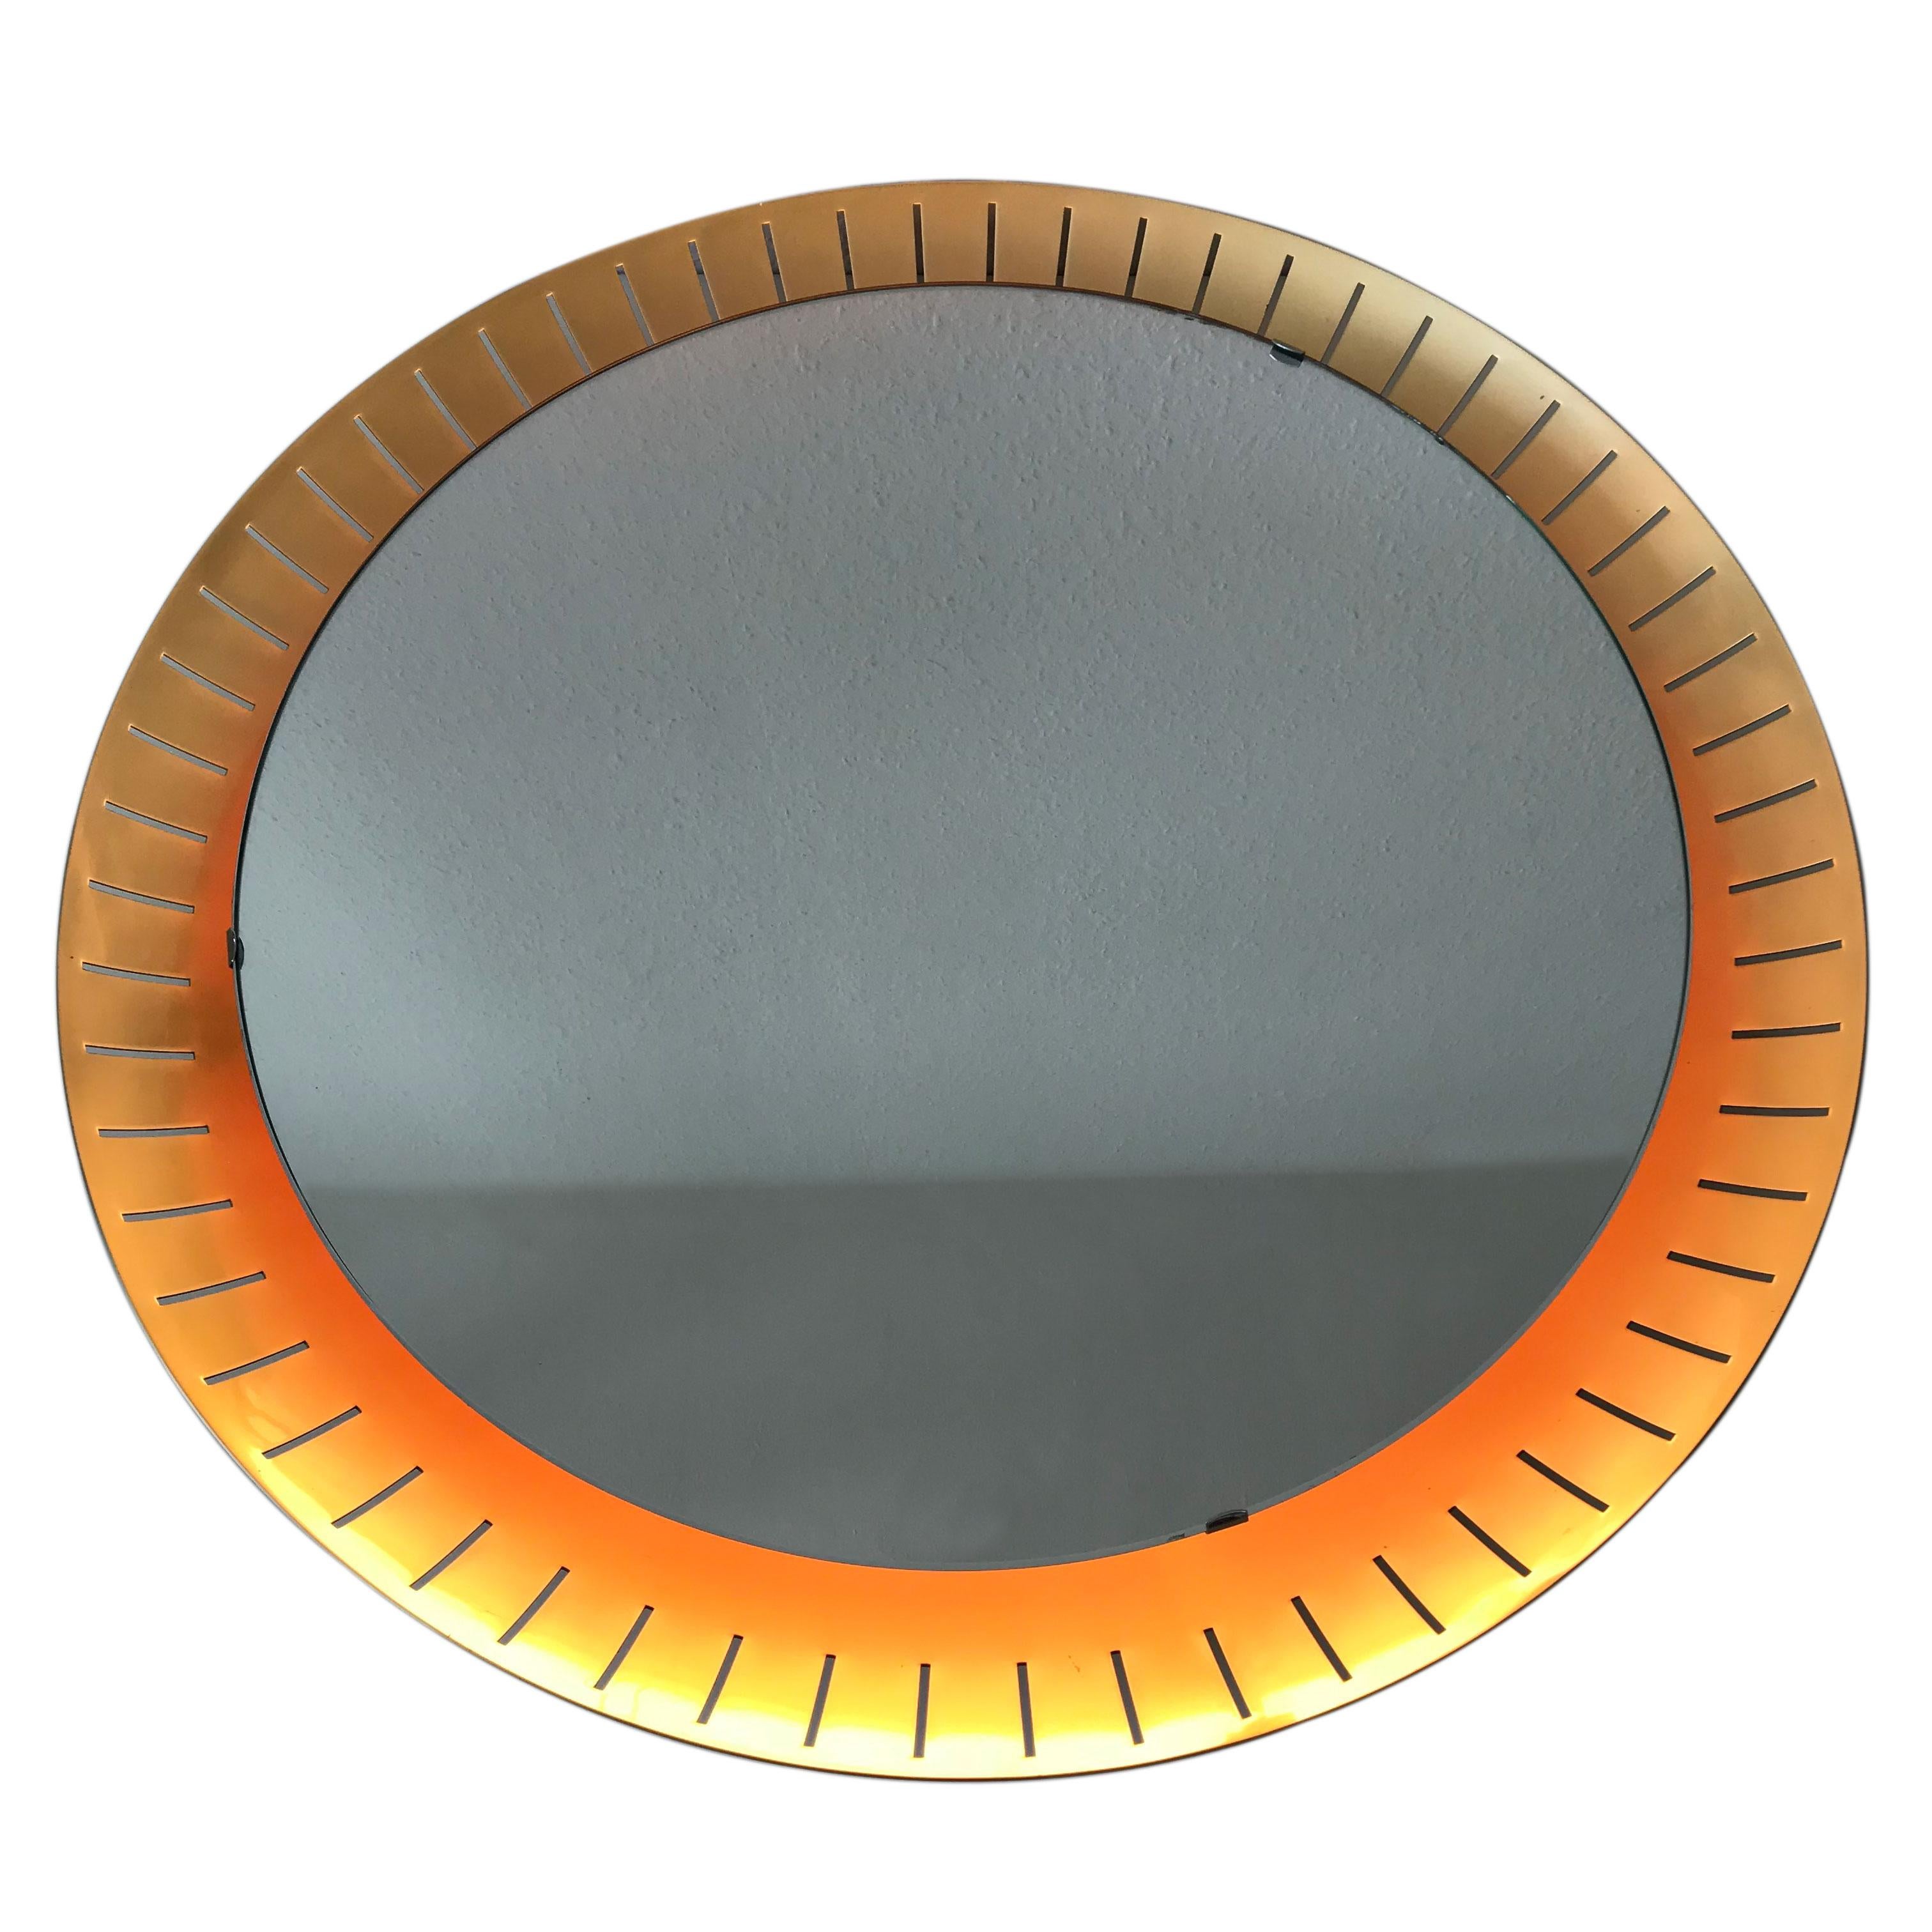 Large Mid-Century Modern Backlit Wall Mirror by Hillebrand, 1950s, Germany For Sale 2